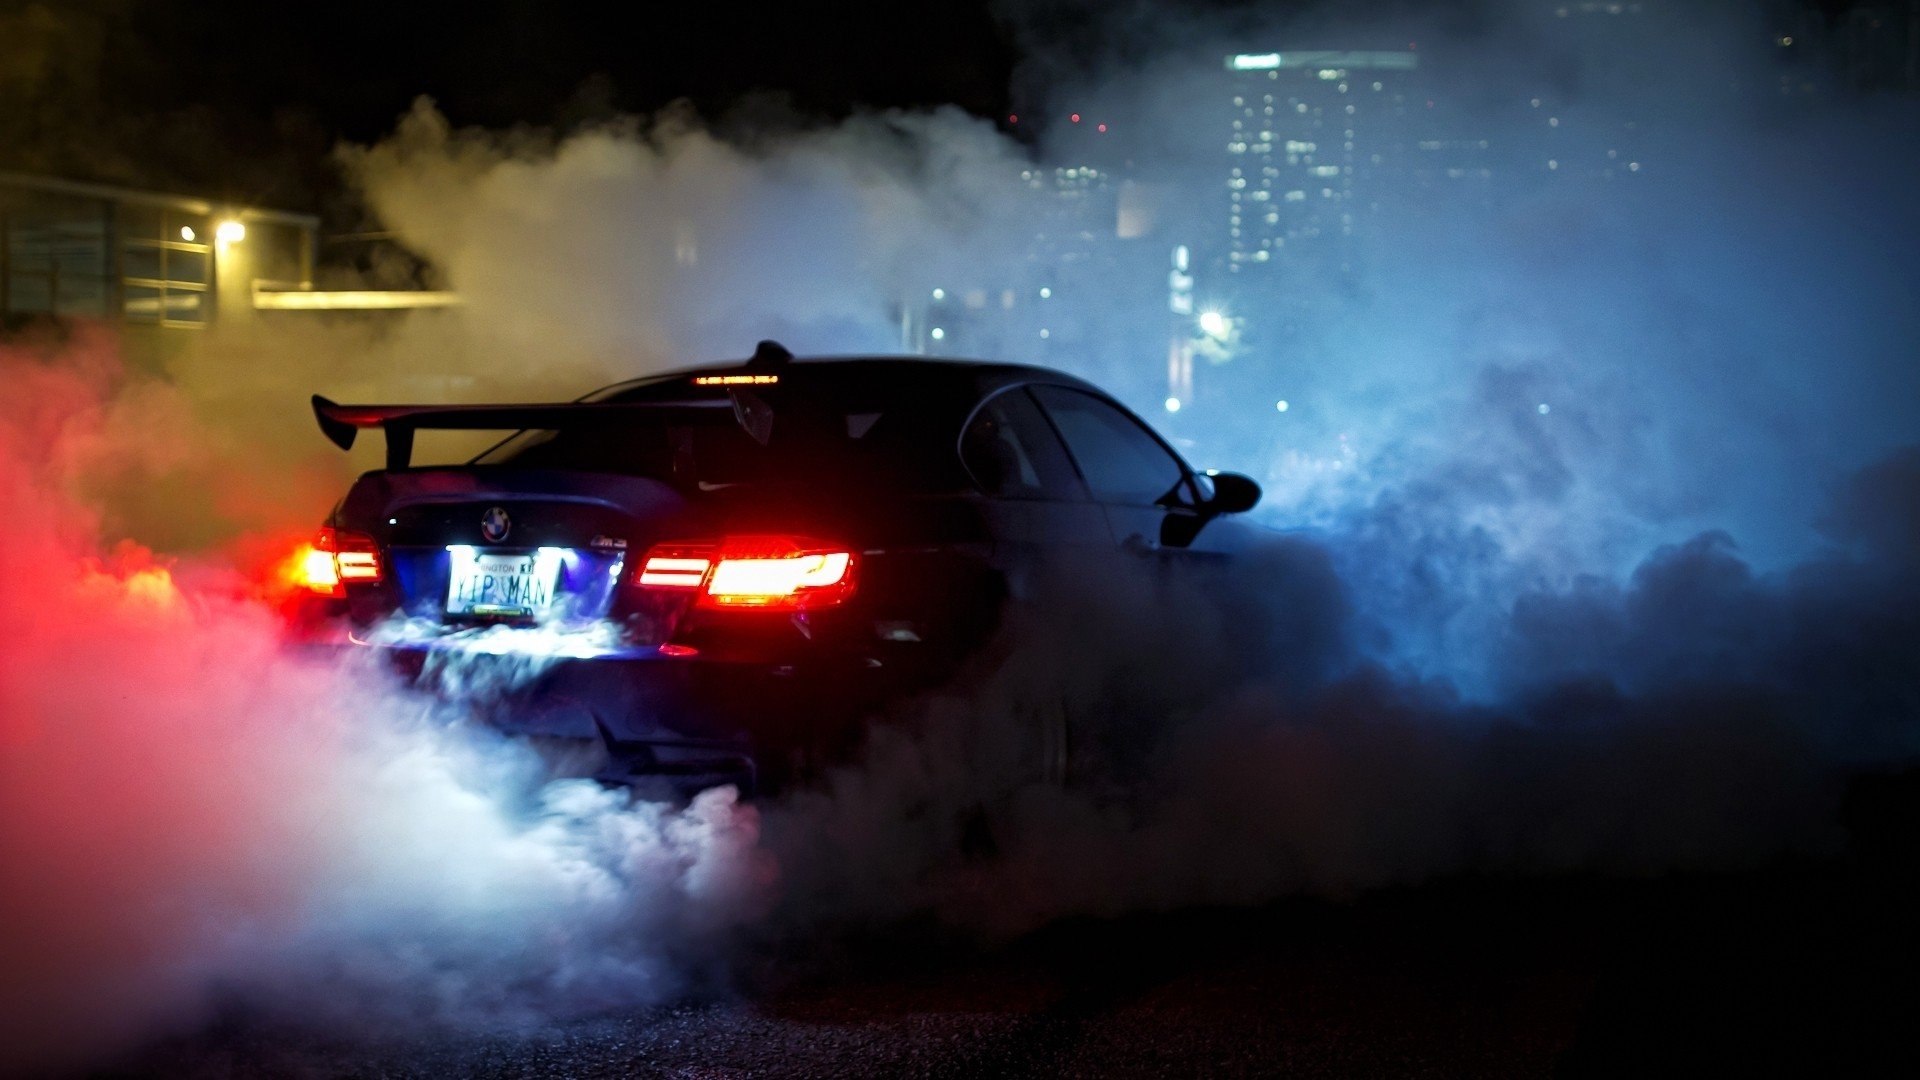 232 Nice Manipulation wallpapers car in smoke for Wall poster in bedroom